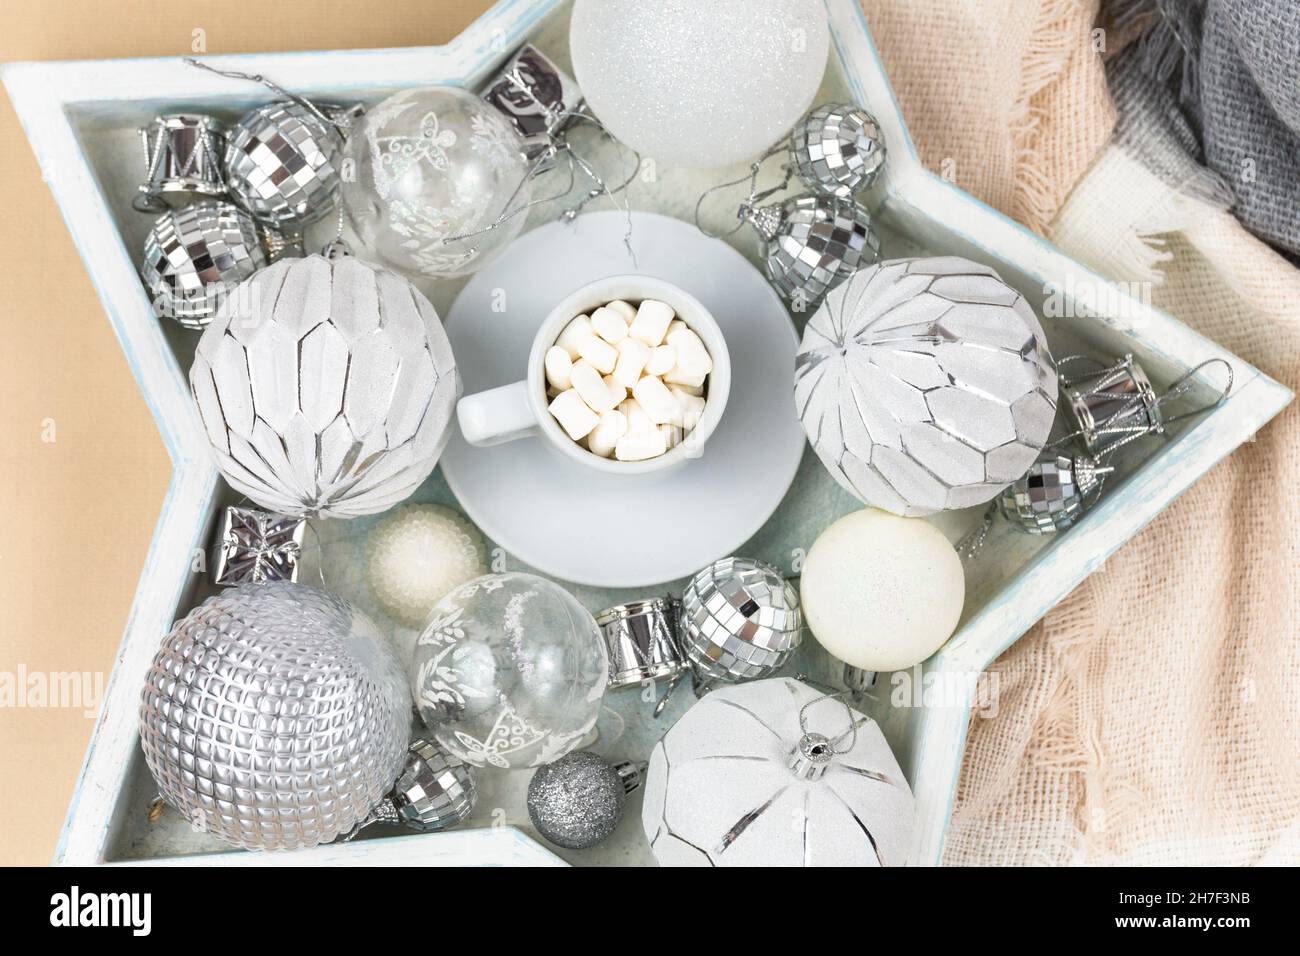 A cup of coffee with marshmallows on white tray and garlands, led lights. Christmas still life Stock Photo